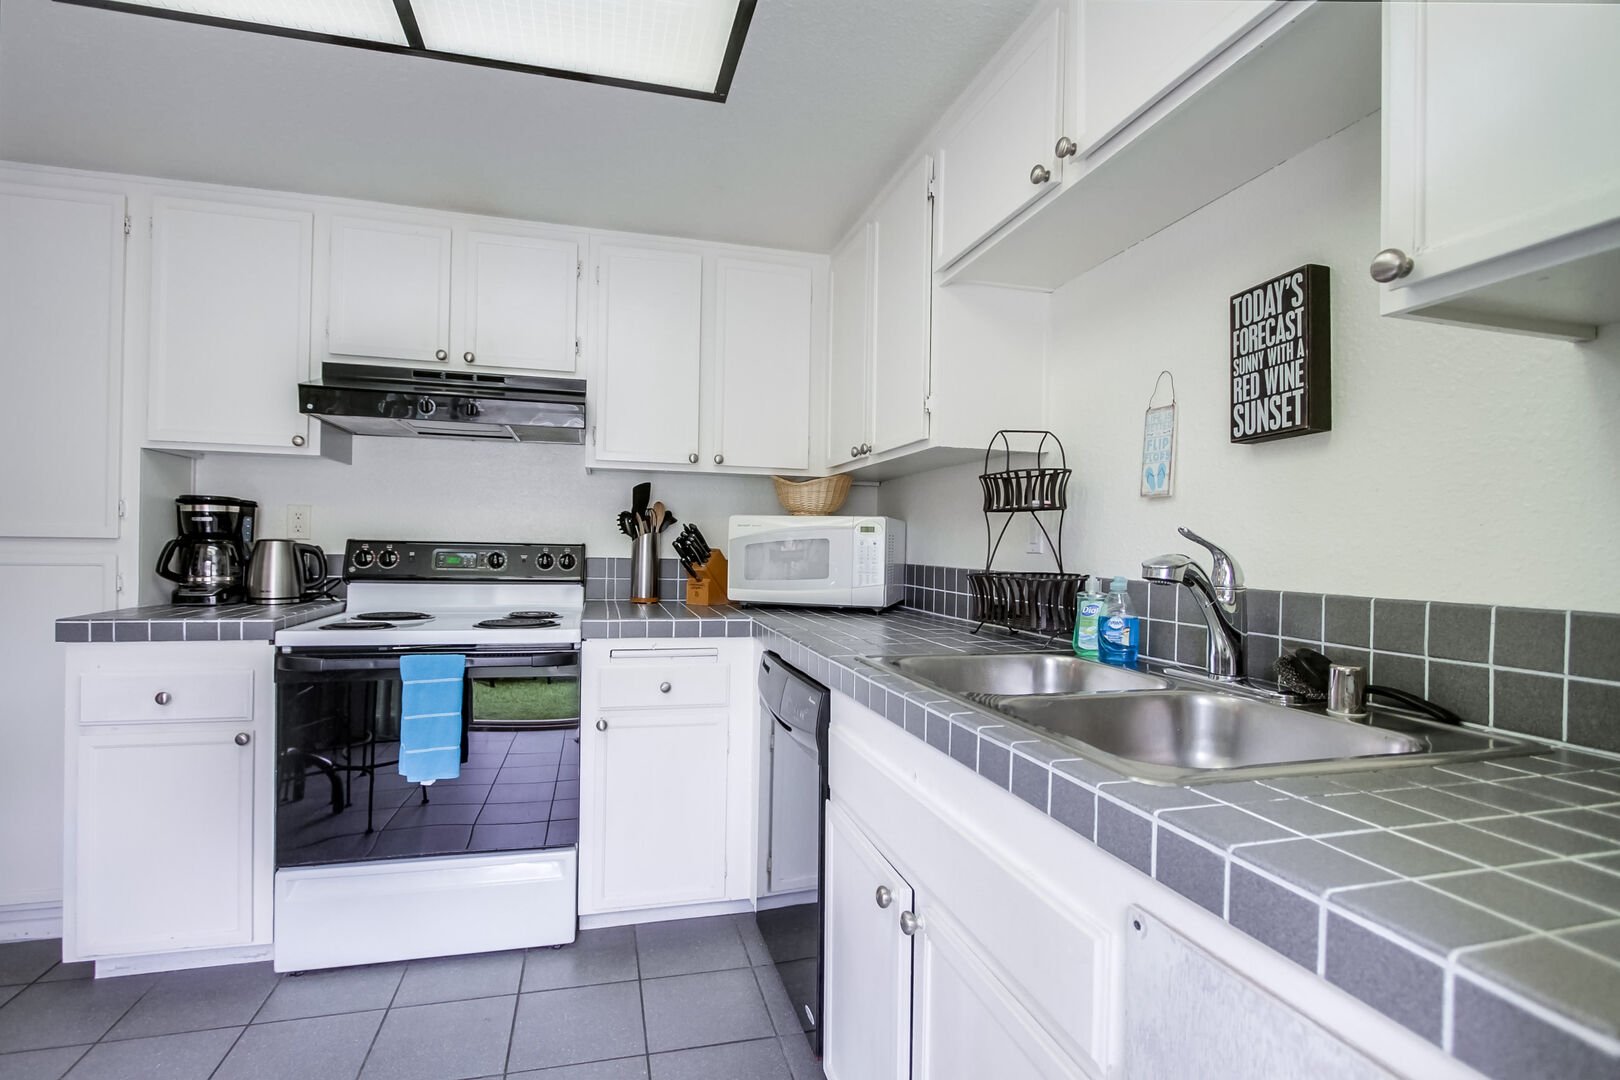 Plenty of room to prep meals in the kitchen and the ease to access the patio with propane grill!